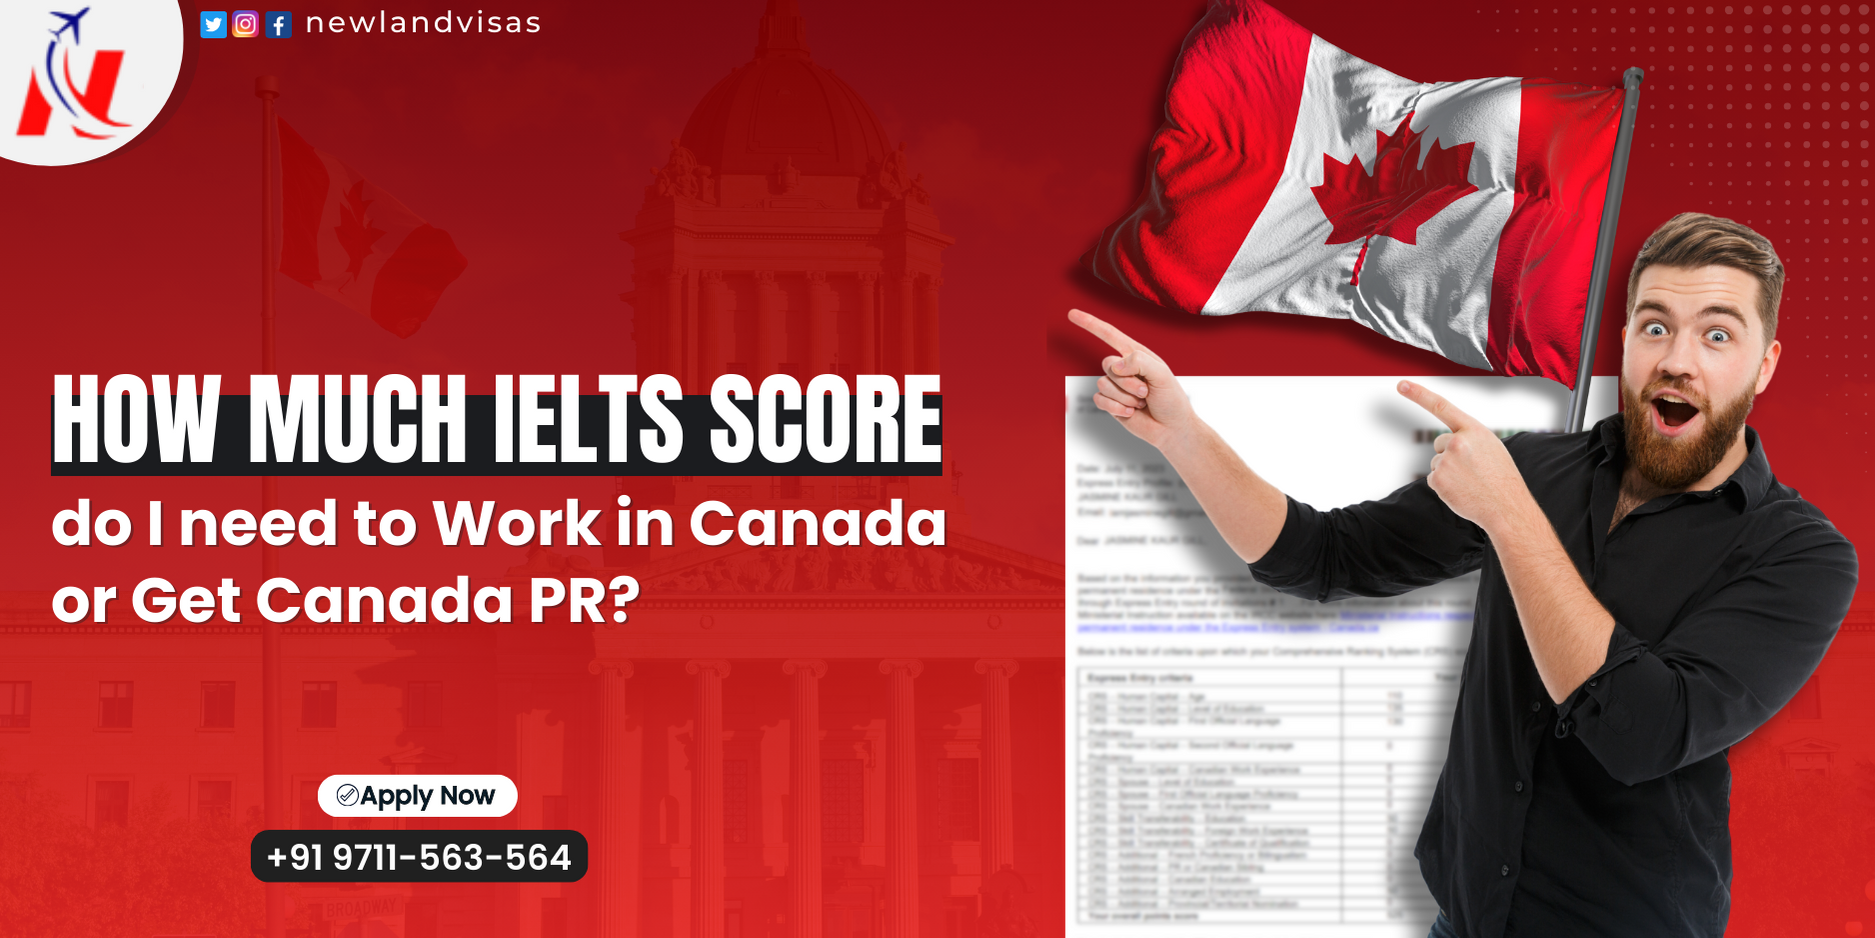 How much IELTS Score do I need to Work in Canada or Get Canada PR?